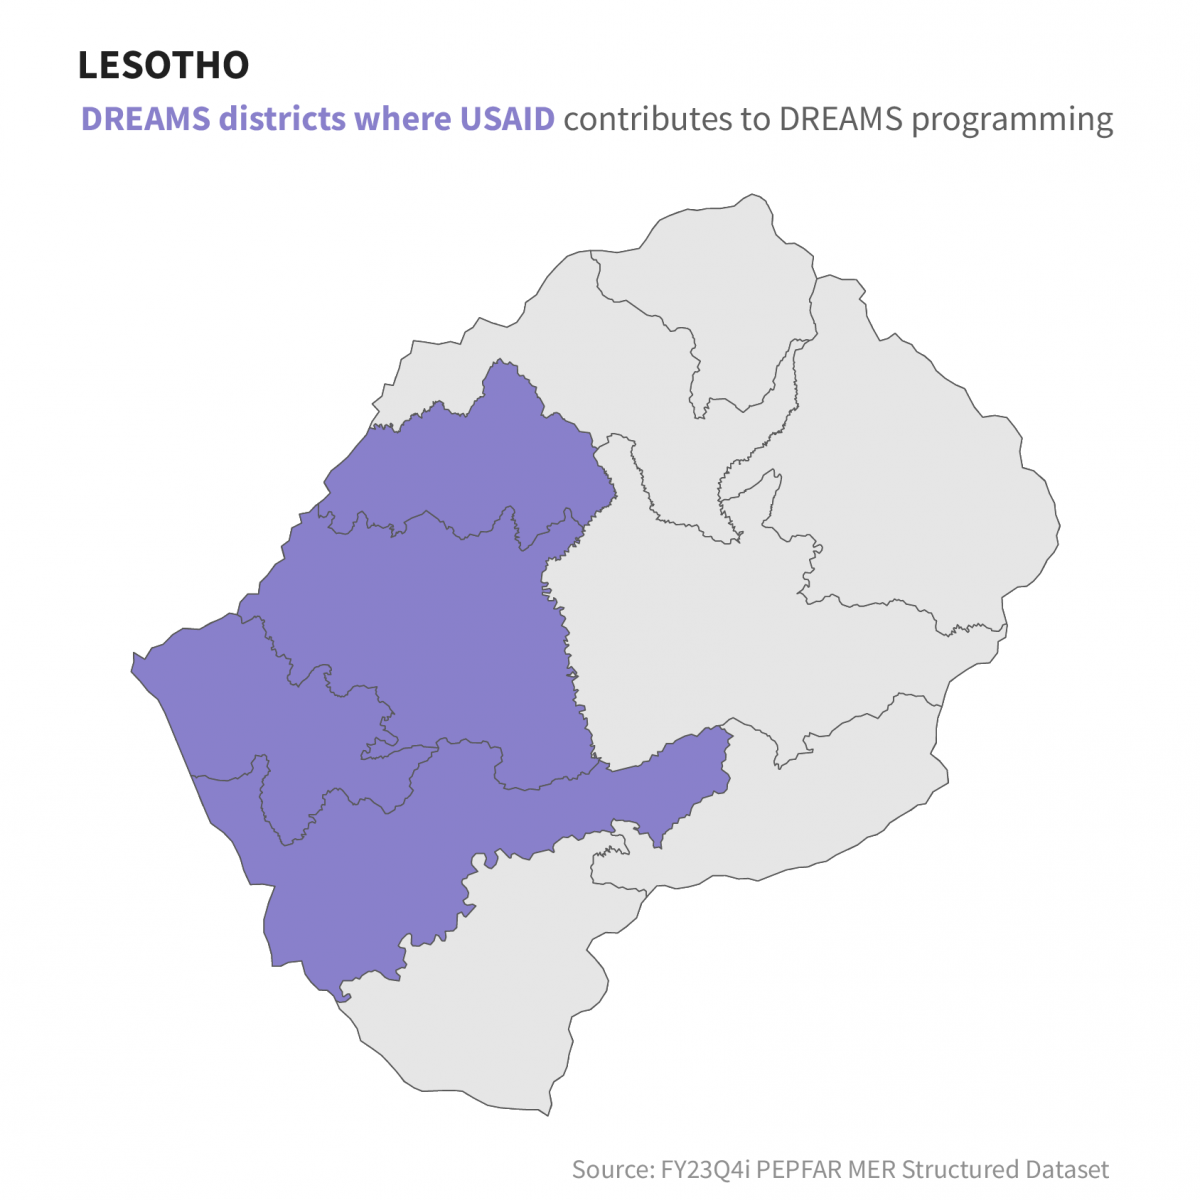 Lesotho: DREAMS districts where USAID contributes to DREAMS programming